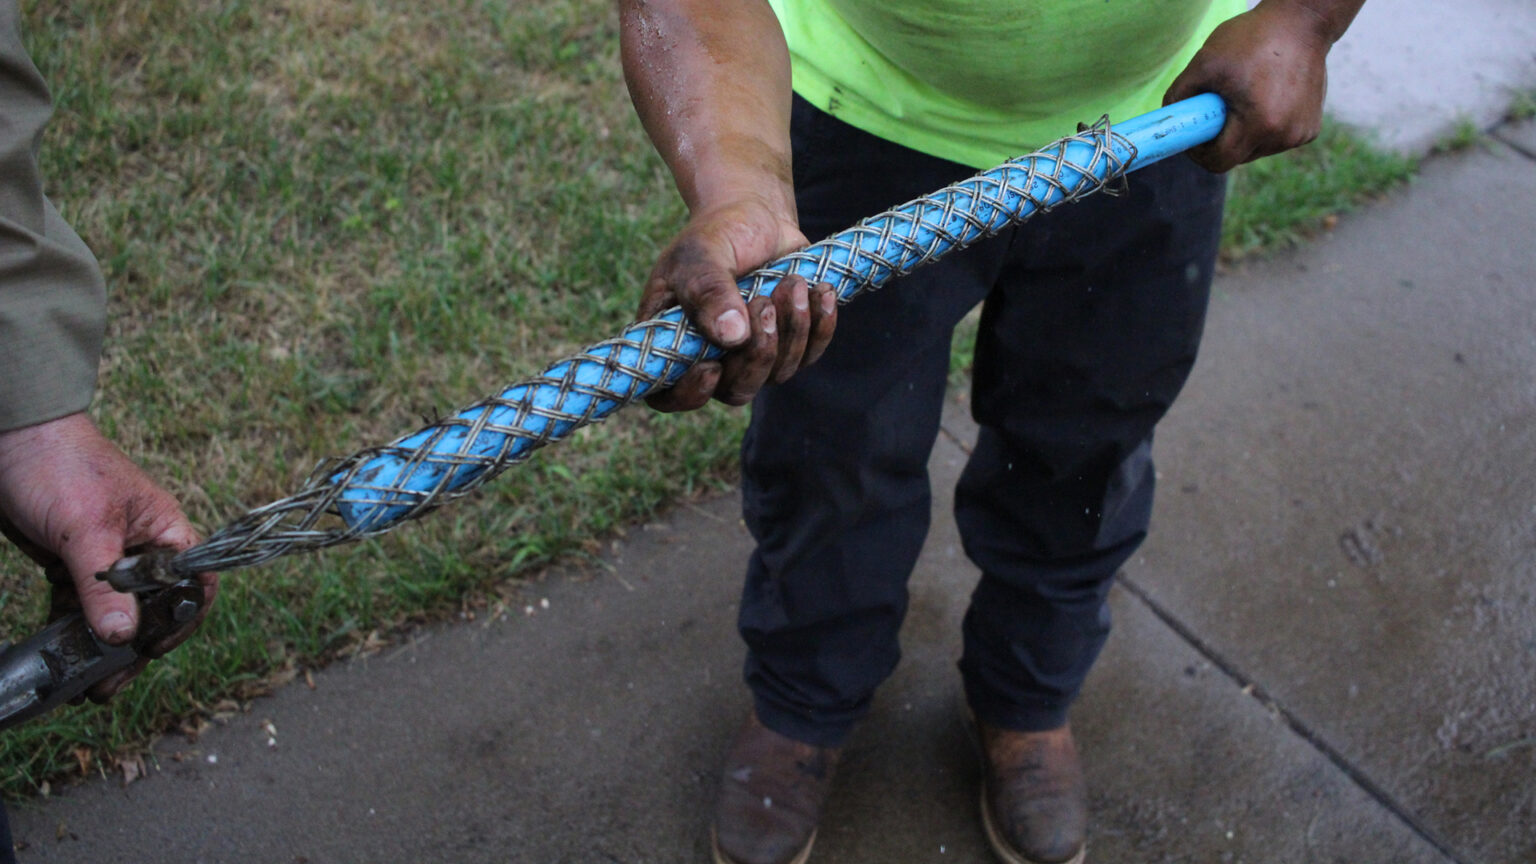 Workers hold a blue replacement water pipe surrounded by metal netting.